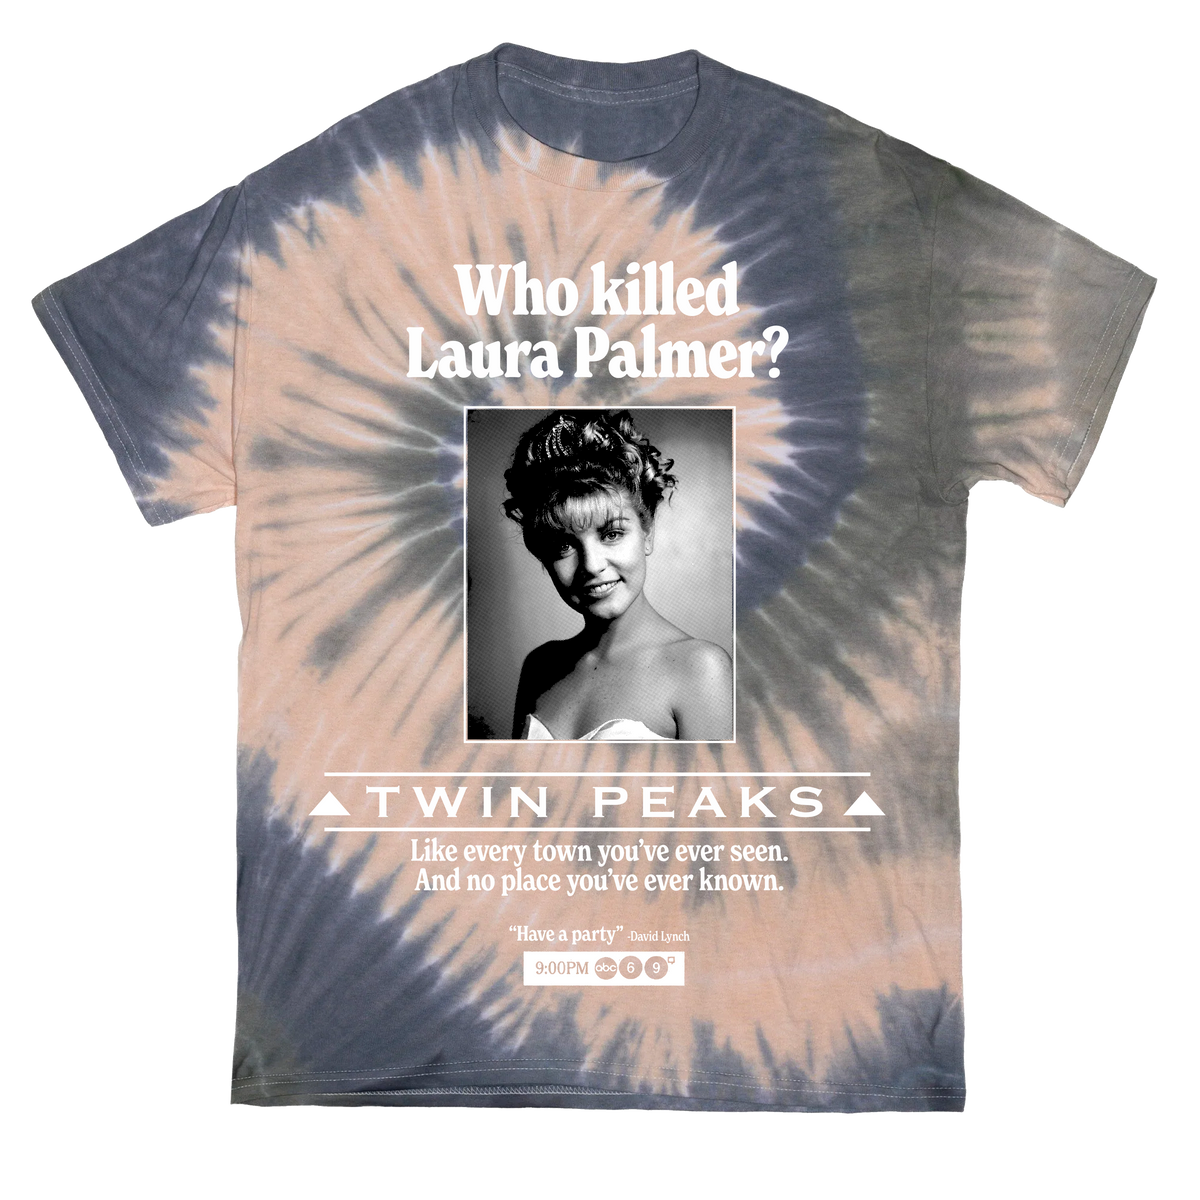 TWIN PEAKS TIEDYE PREORDER (LIMITED! COLOR OPTIONS AVAILABLE!)